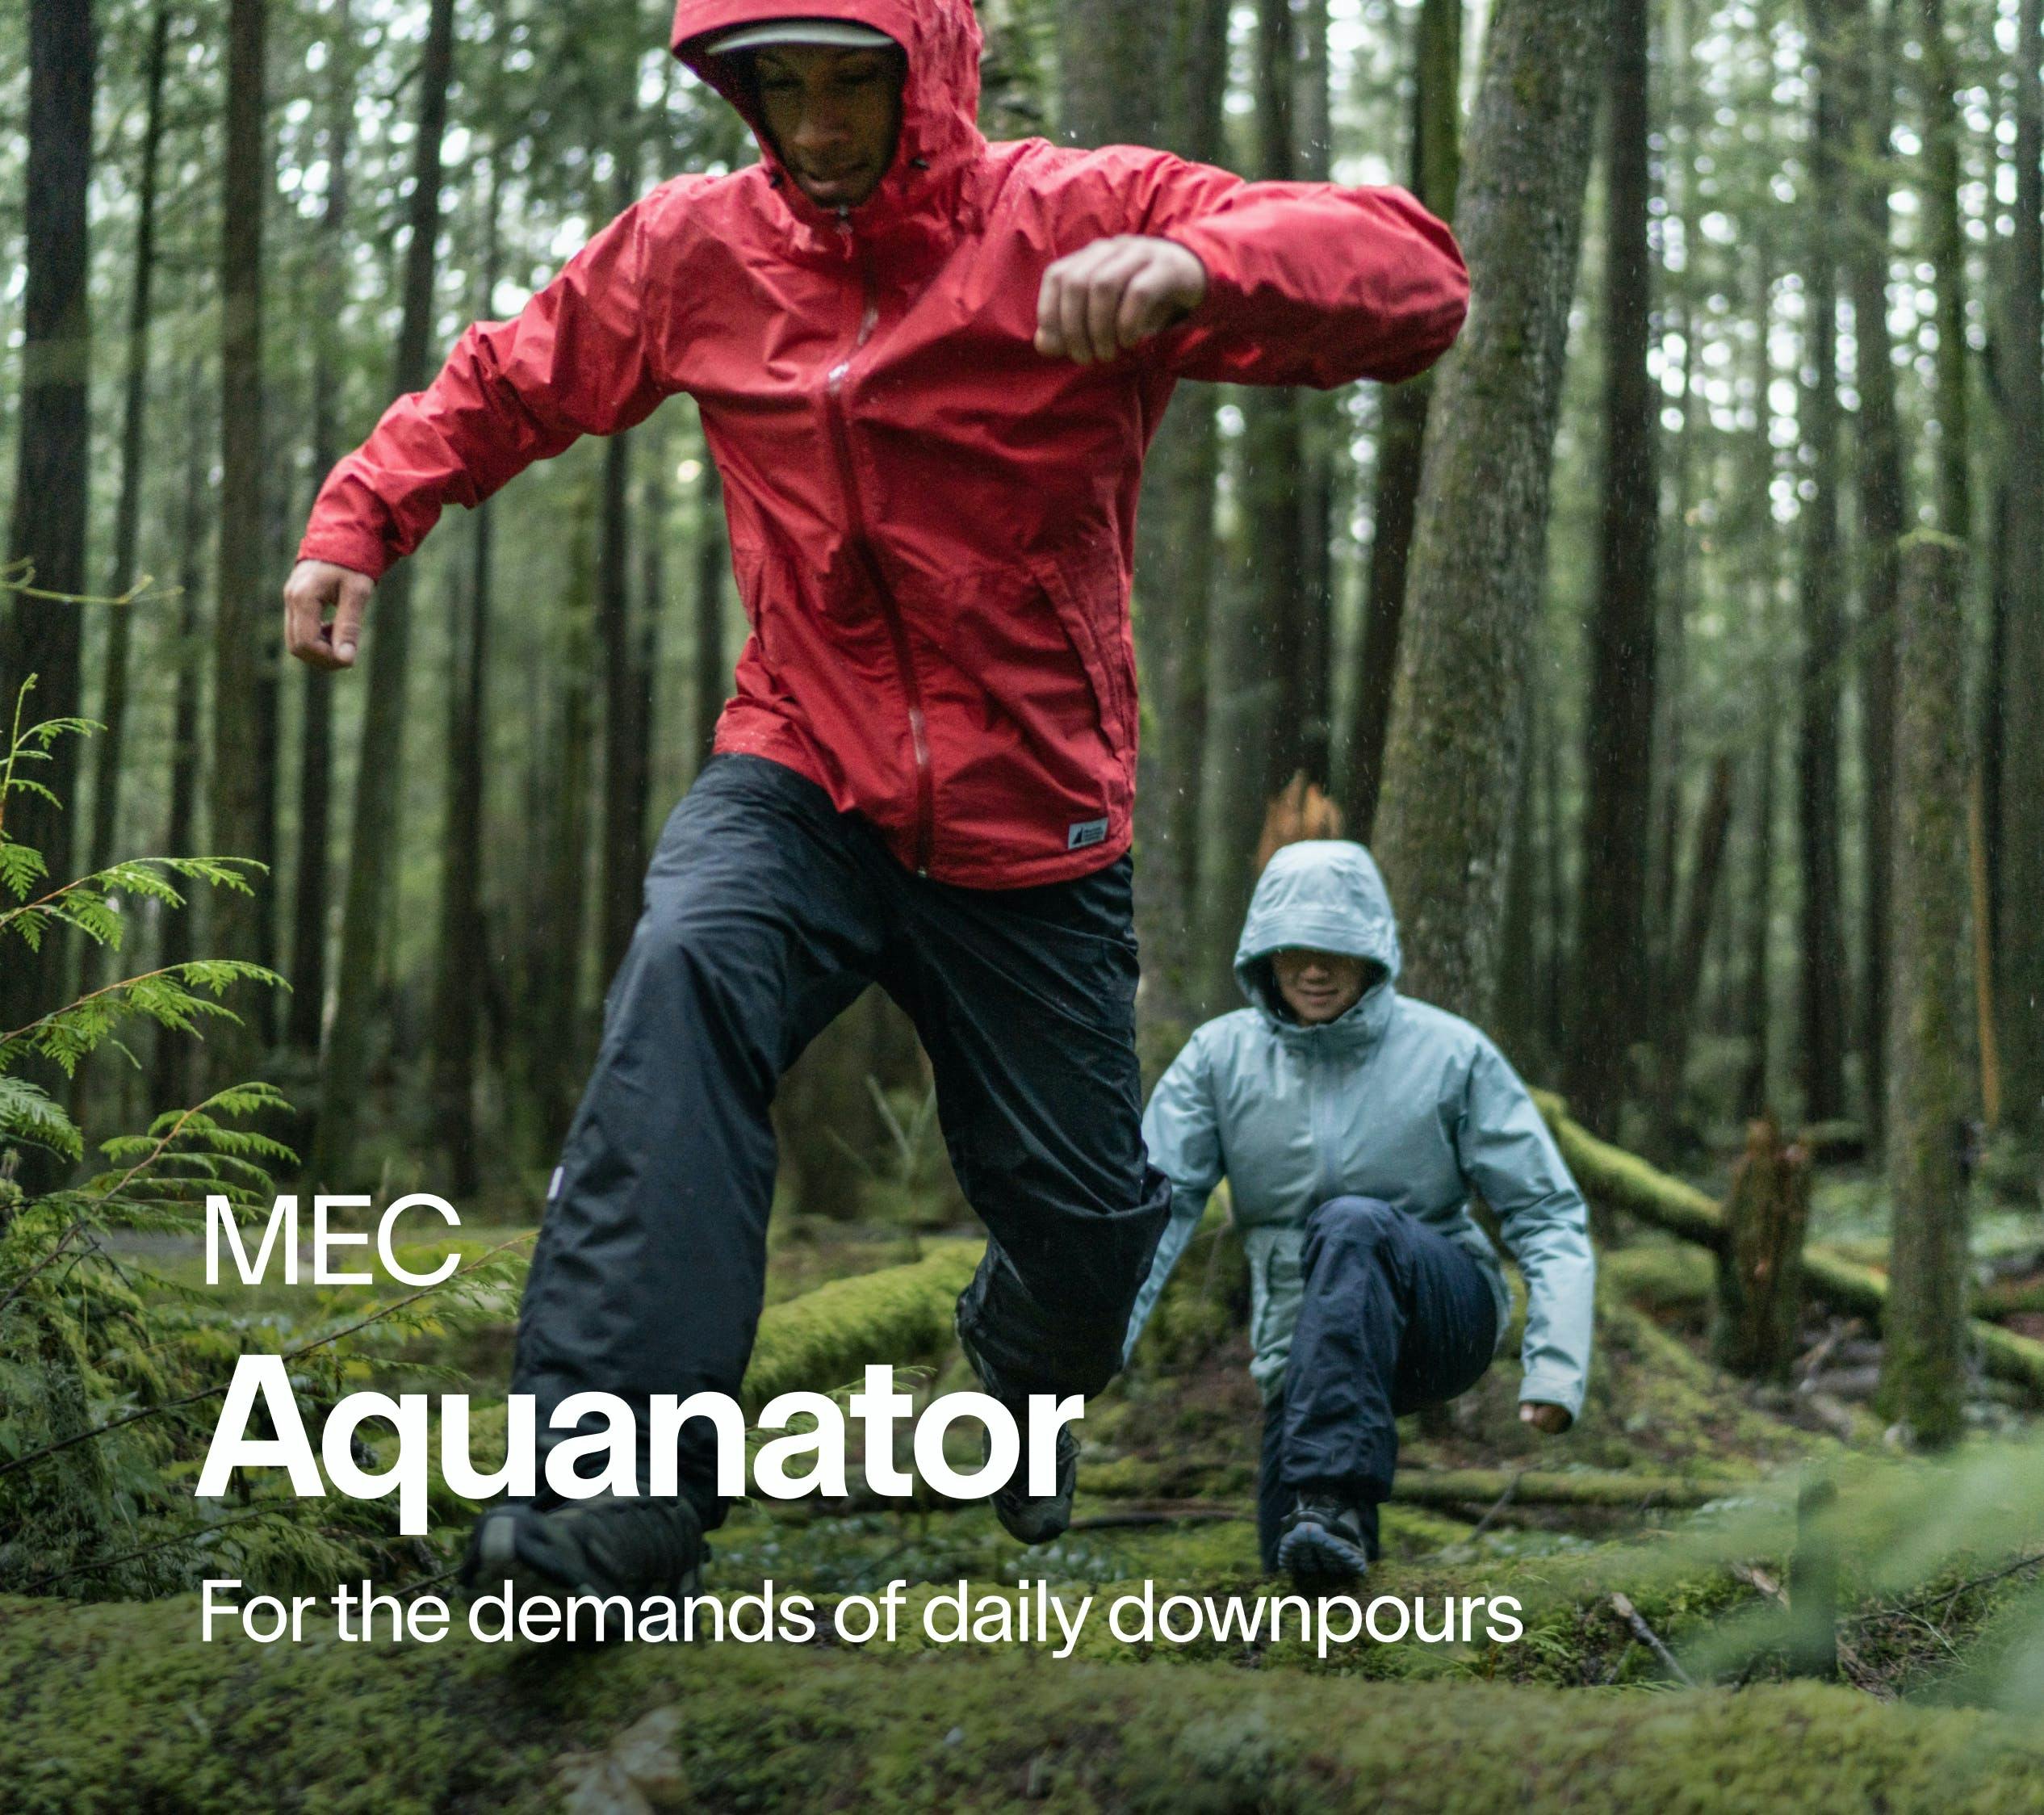 MEC Aquanator. For the demands of daily downpours 